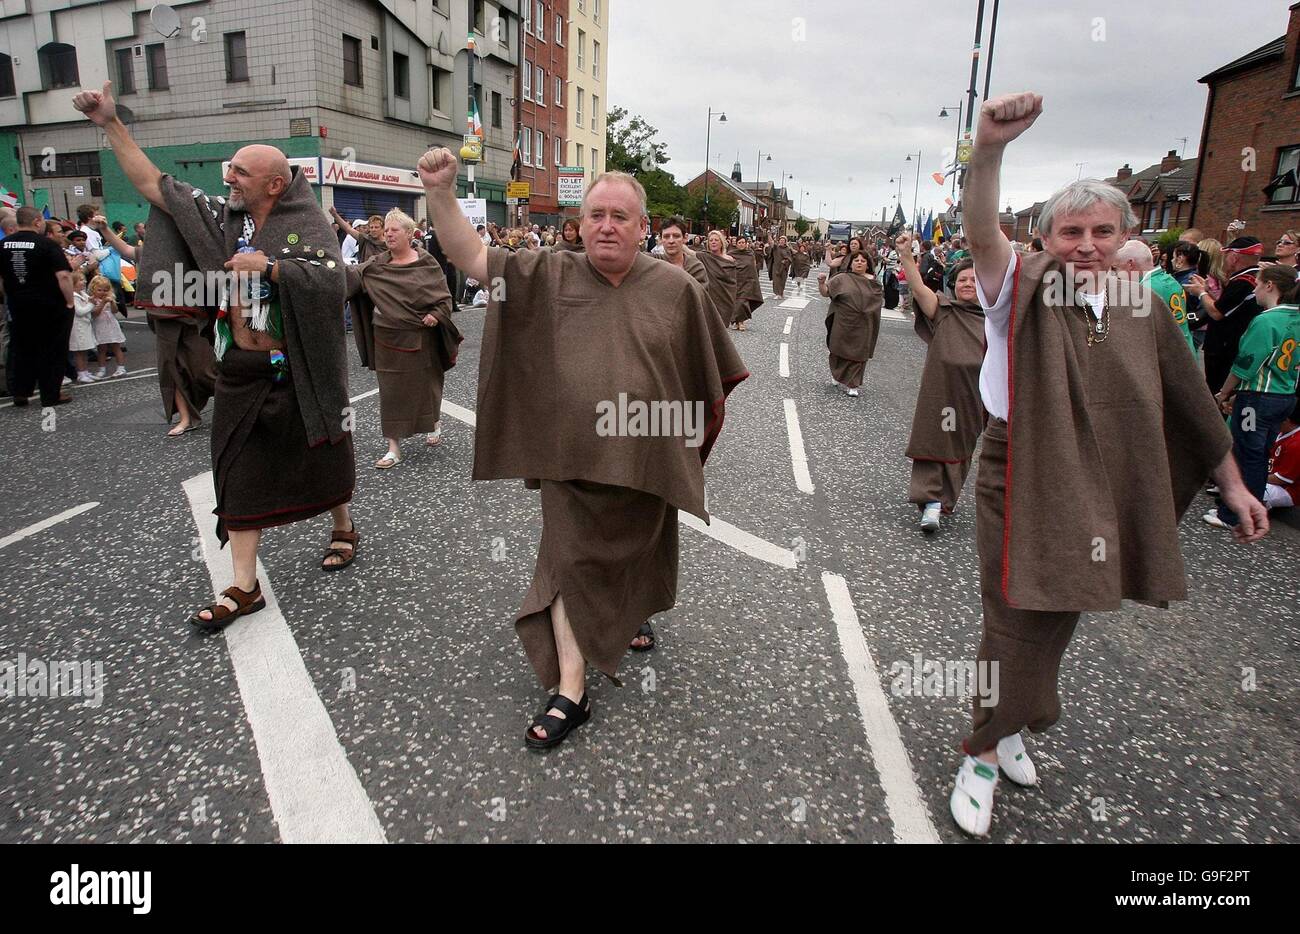 Republicans dressed as prisoners march in West Belfast to commemorate the hunger strike death of IRA prisoners protesting against British government policy. Stock Photo